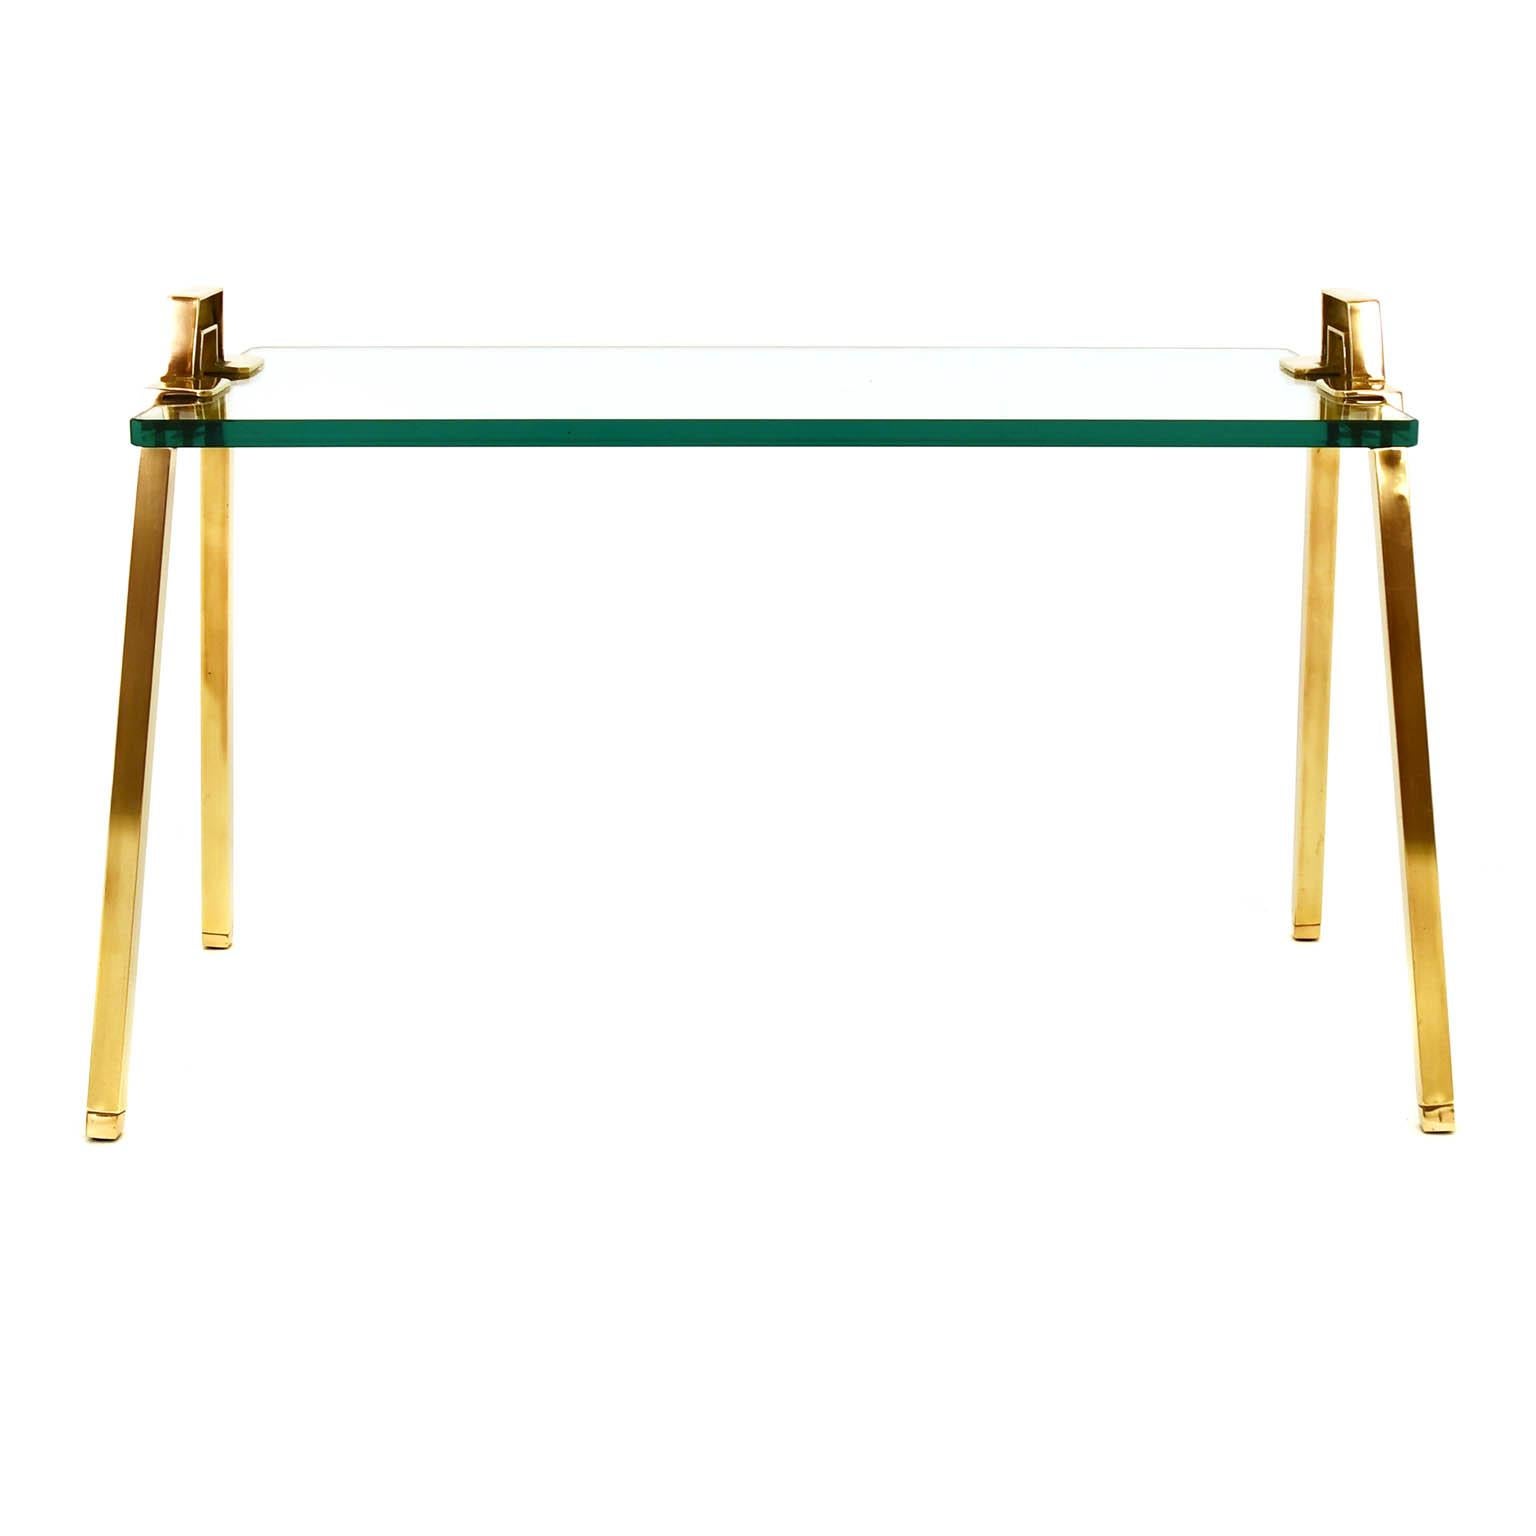 Coffee table by Peter Ghyczy in solid brass and a thick glass top. The legs are designed to be also handles to move the table easily and use it also as a kind of serving tray. The base is made of solid brass tubes and a cast metal